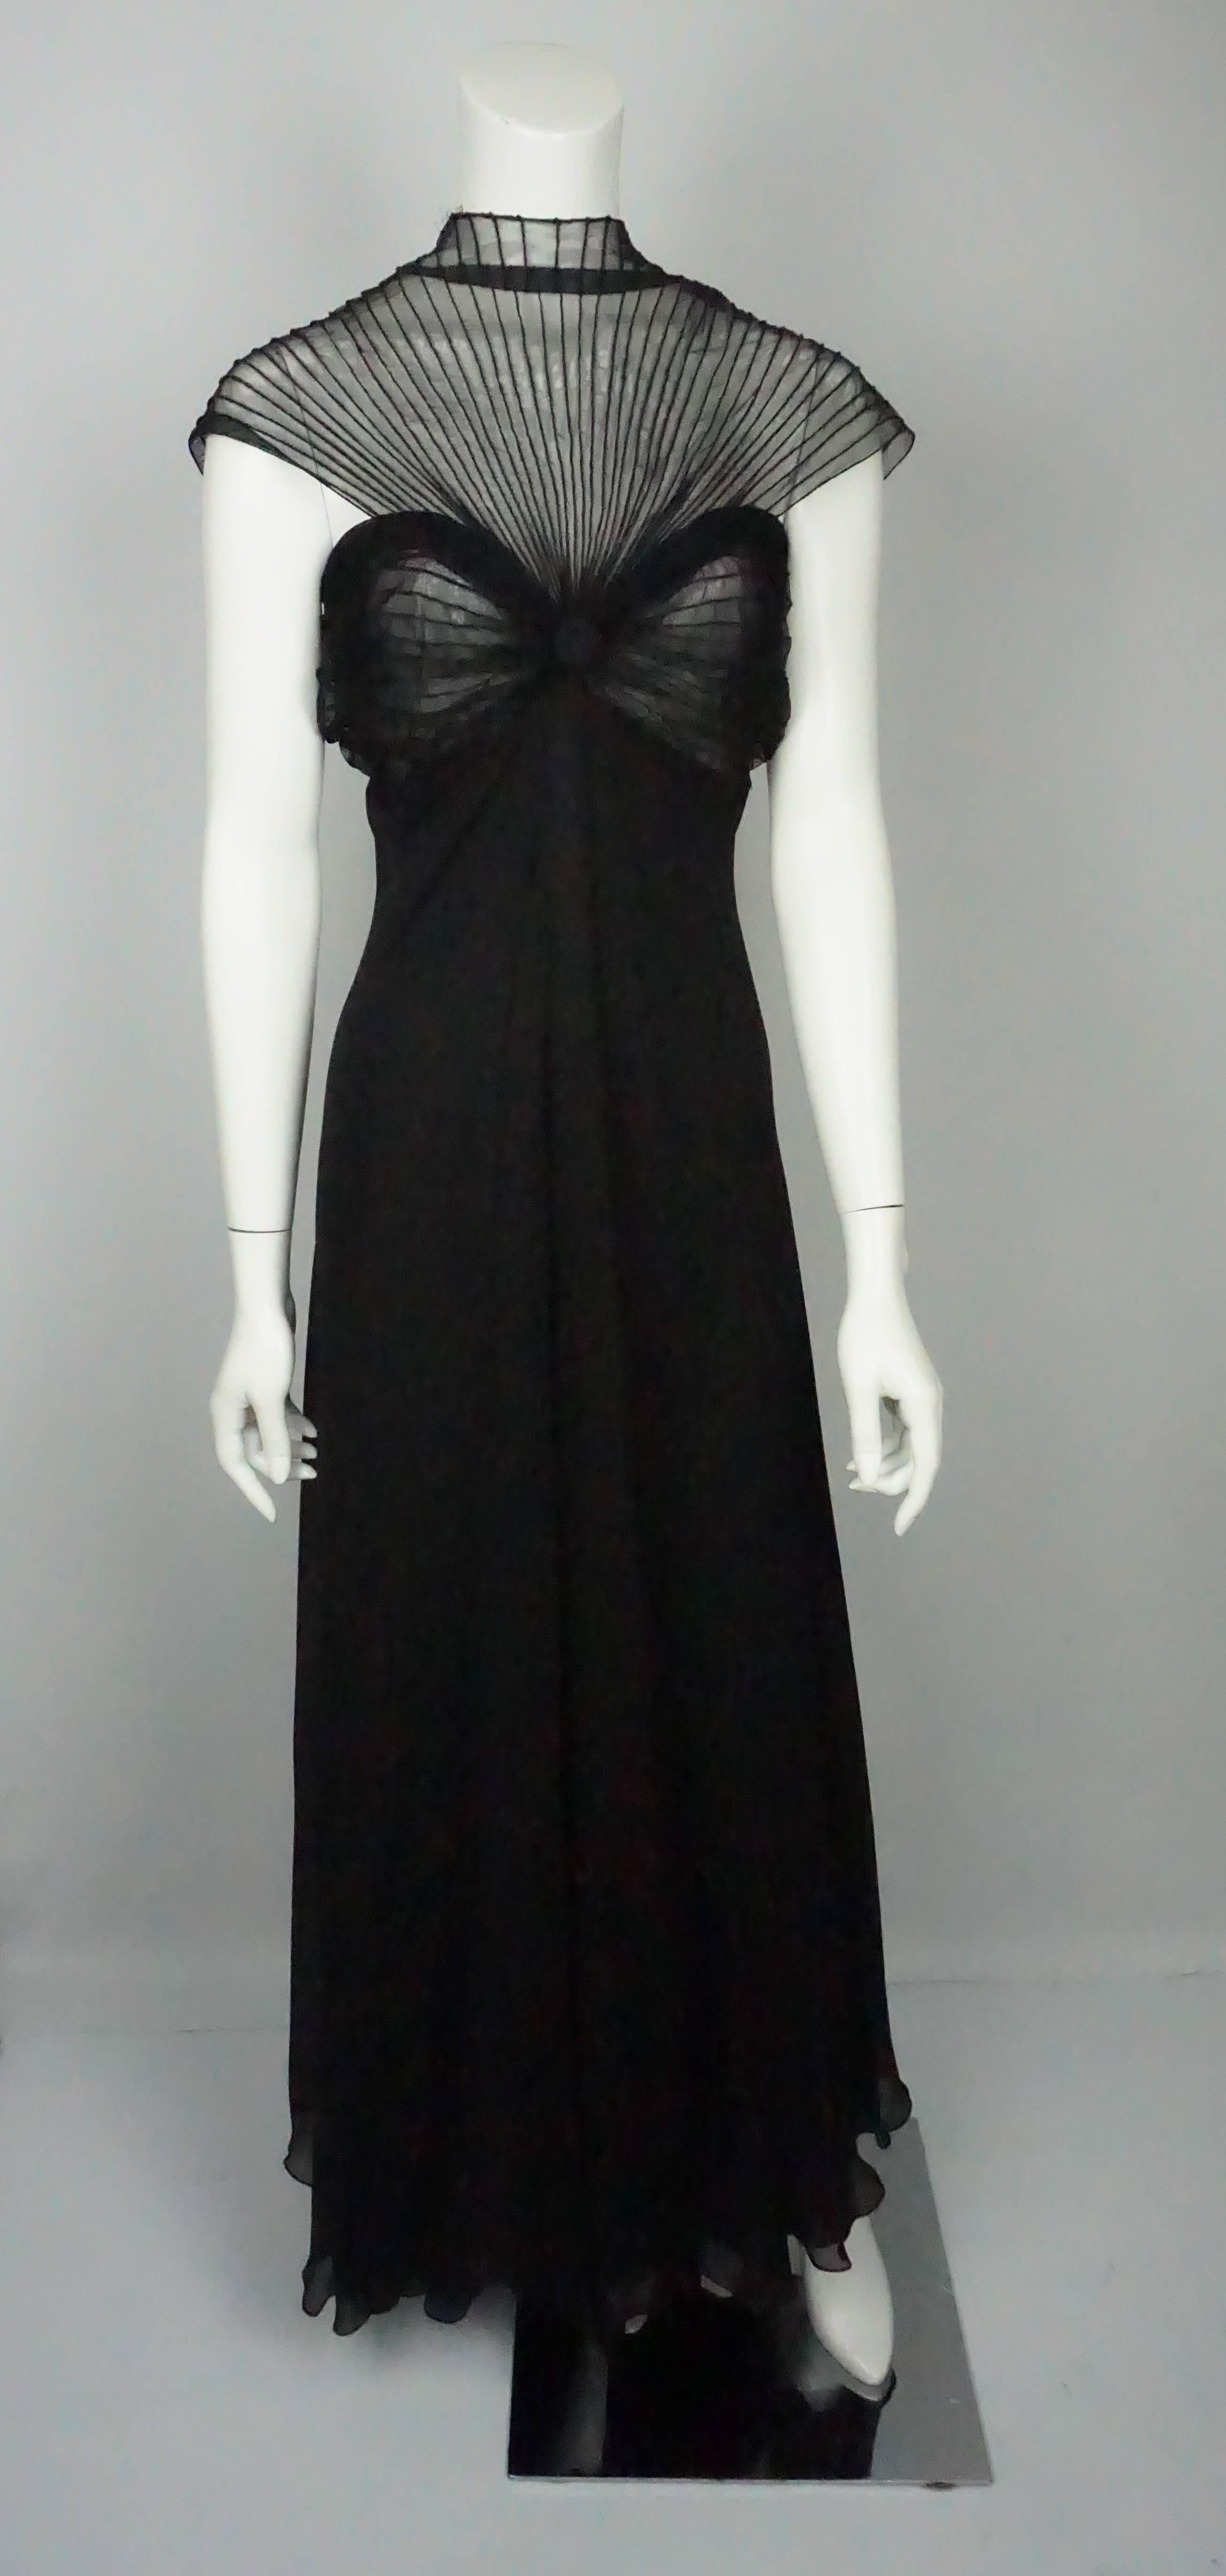 Gianfranco Ferre Black Silk Chiffon Pleated Empire Style Gown - 44  This stunning dress is in excellent condition. The top of the dress is completely sheer and is made up of a netting material and has sewn in lines that give it an interesting